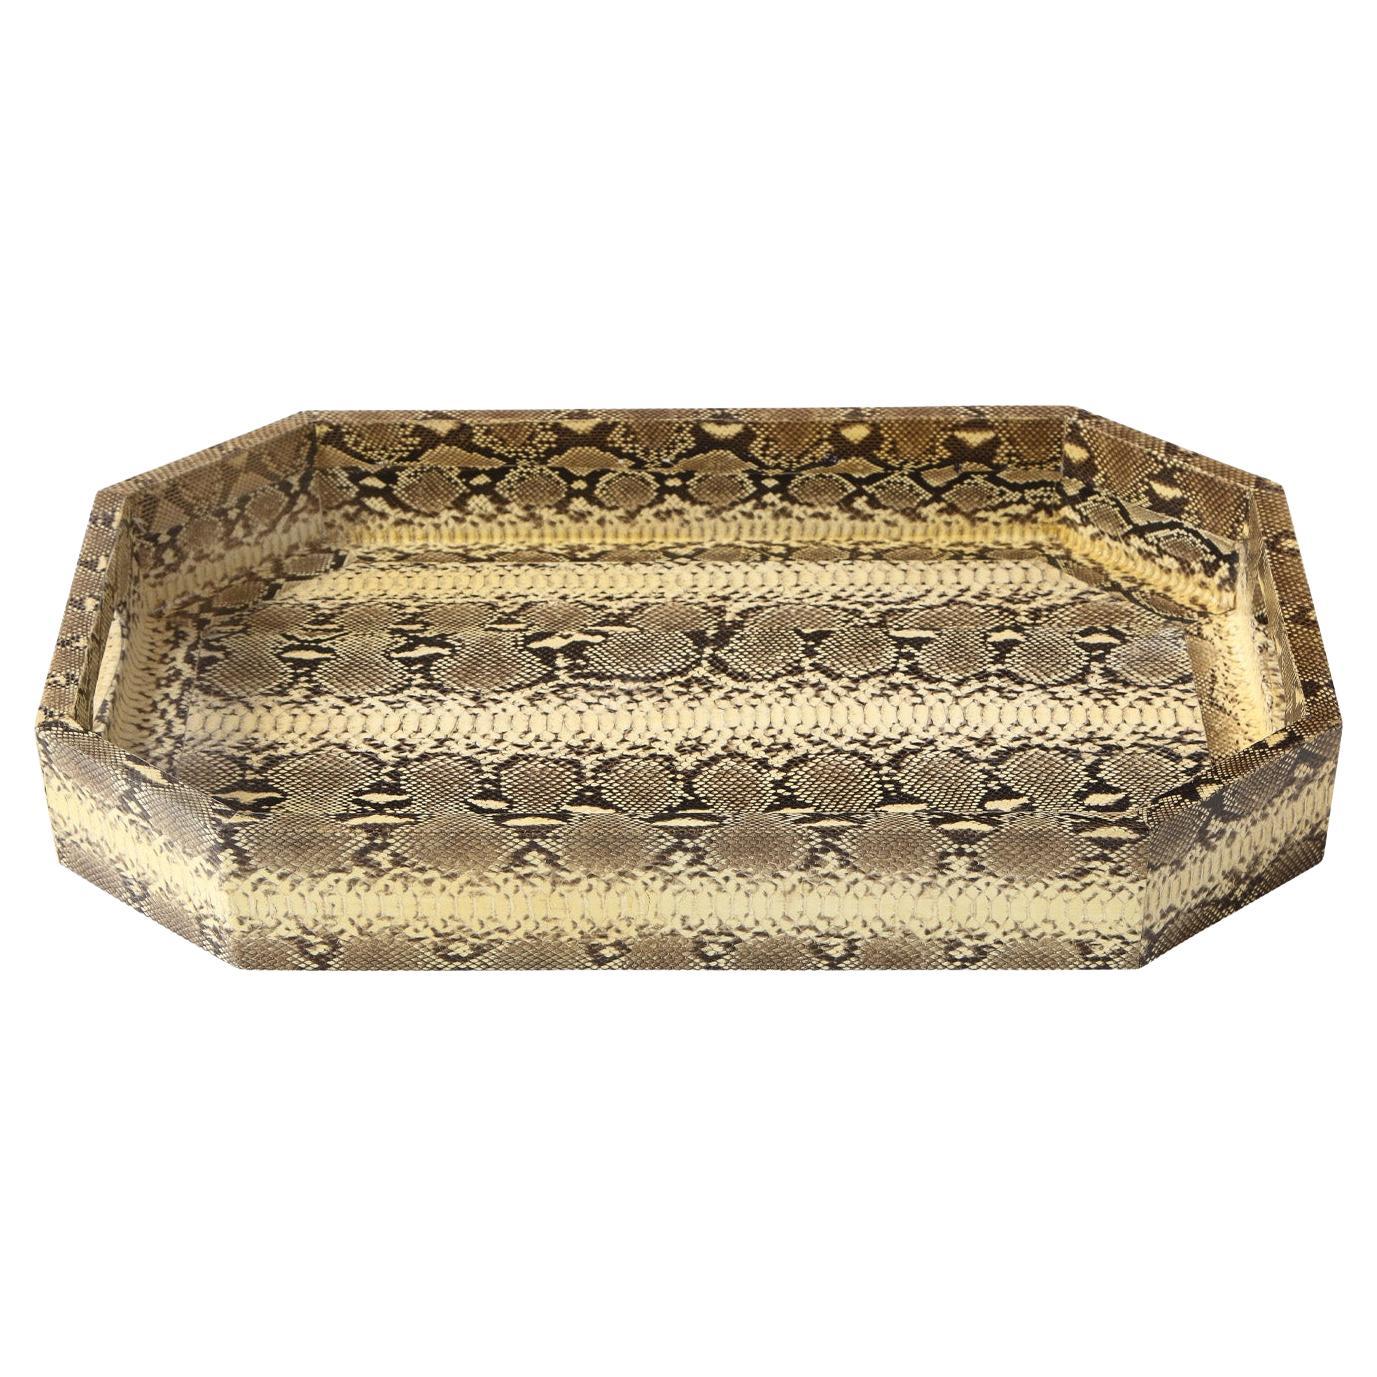 Lobel Originals Octagonal Tray in Natural Python, New For Sale